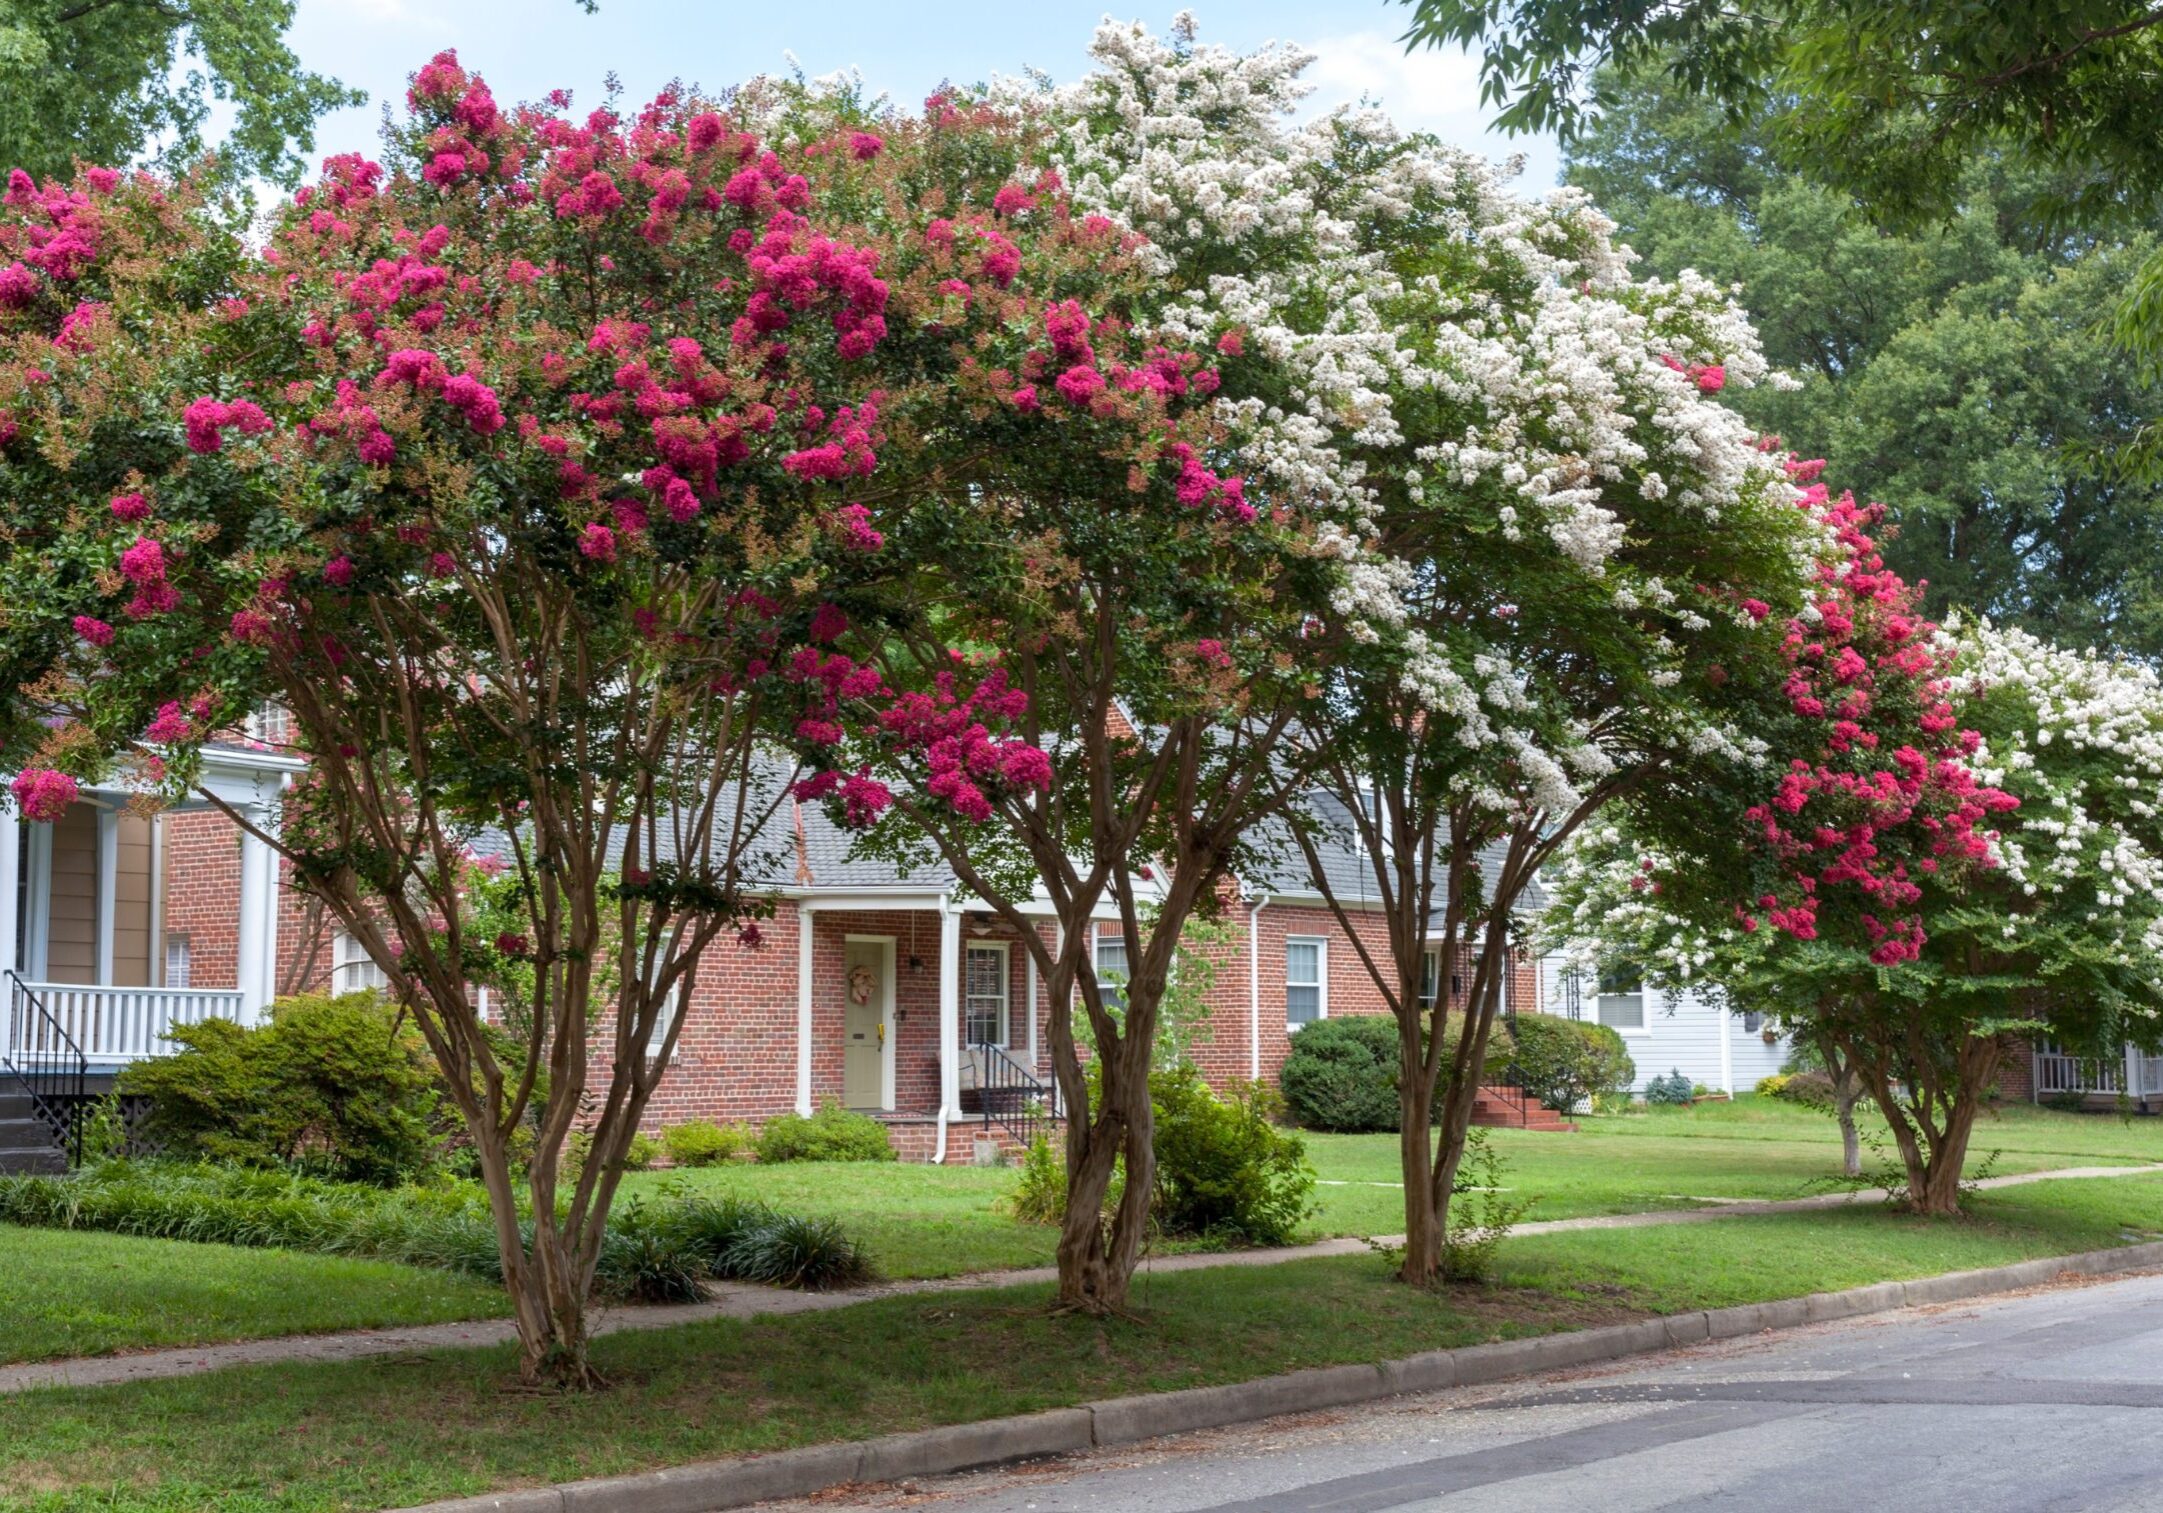 Red,And,White,Crepe,Myrtle,Trees,On,Residential,Neighborhood,Street.